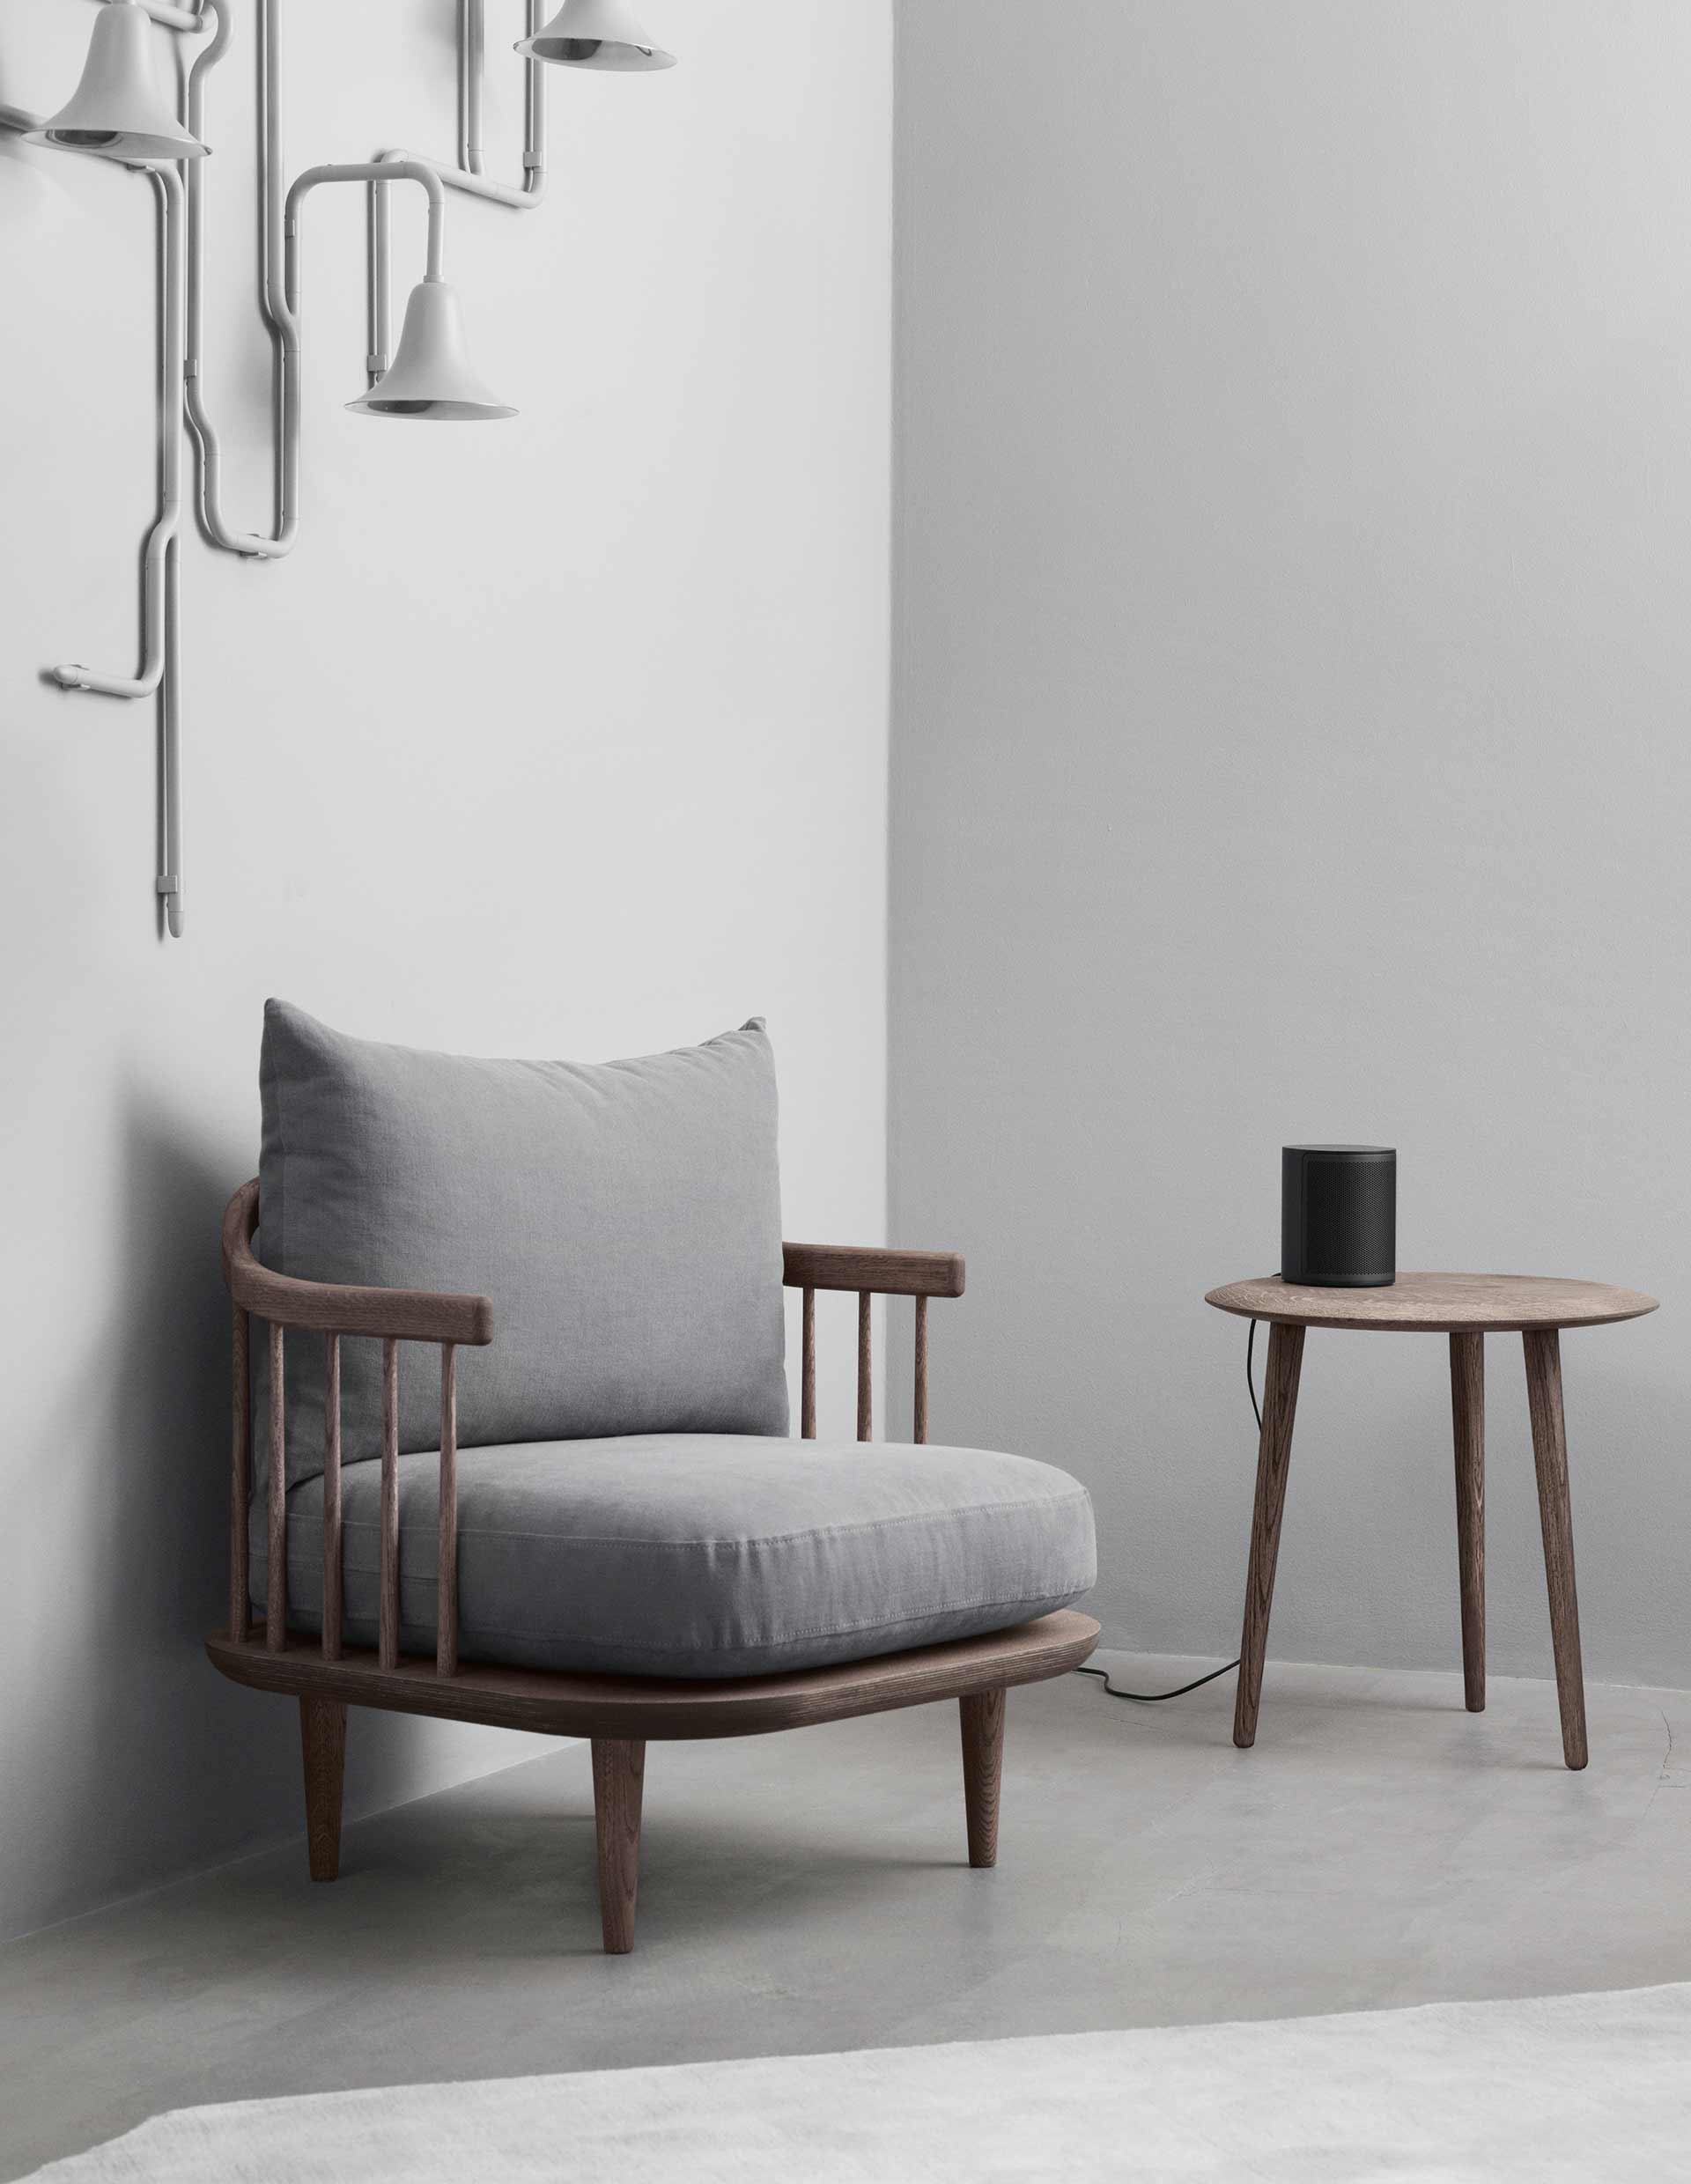 Beoplay M3 - Multiroom, design speakers with rich sound | B&O